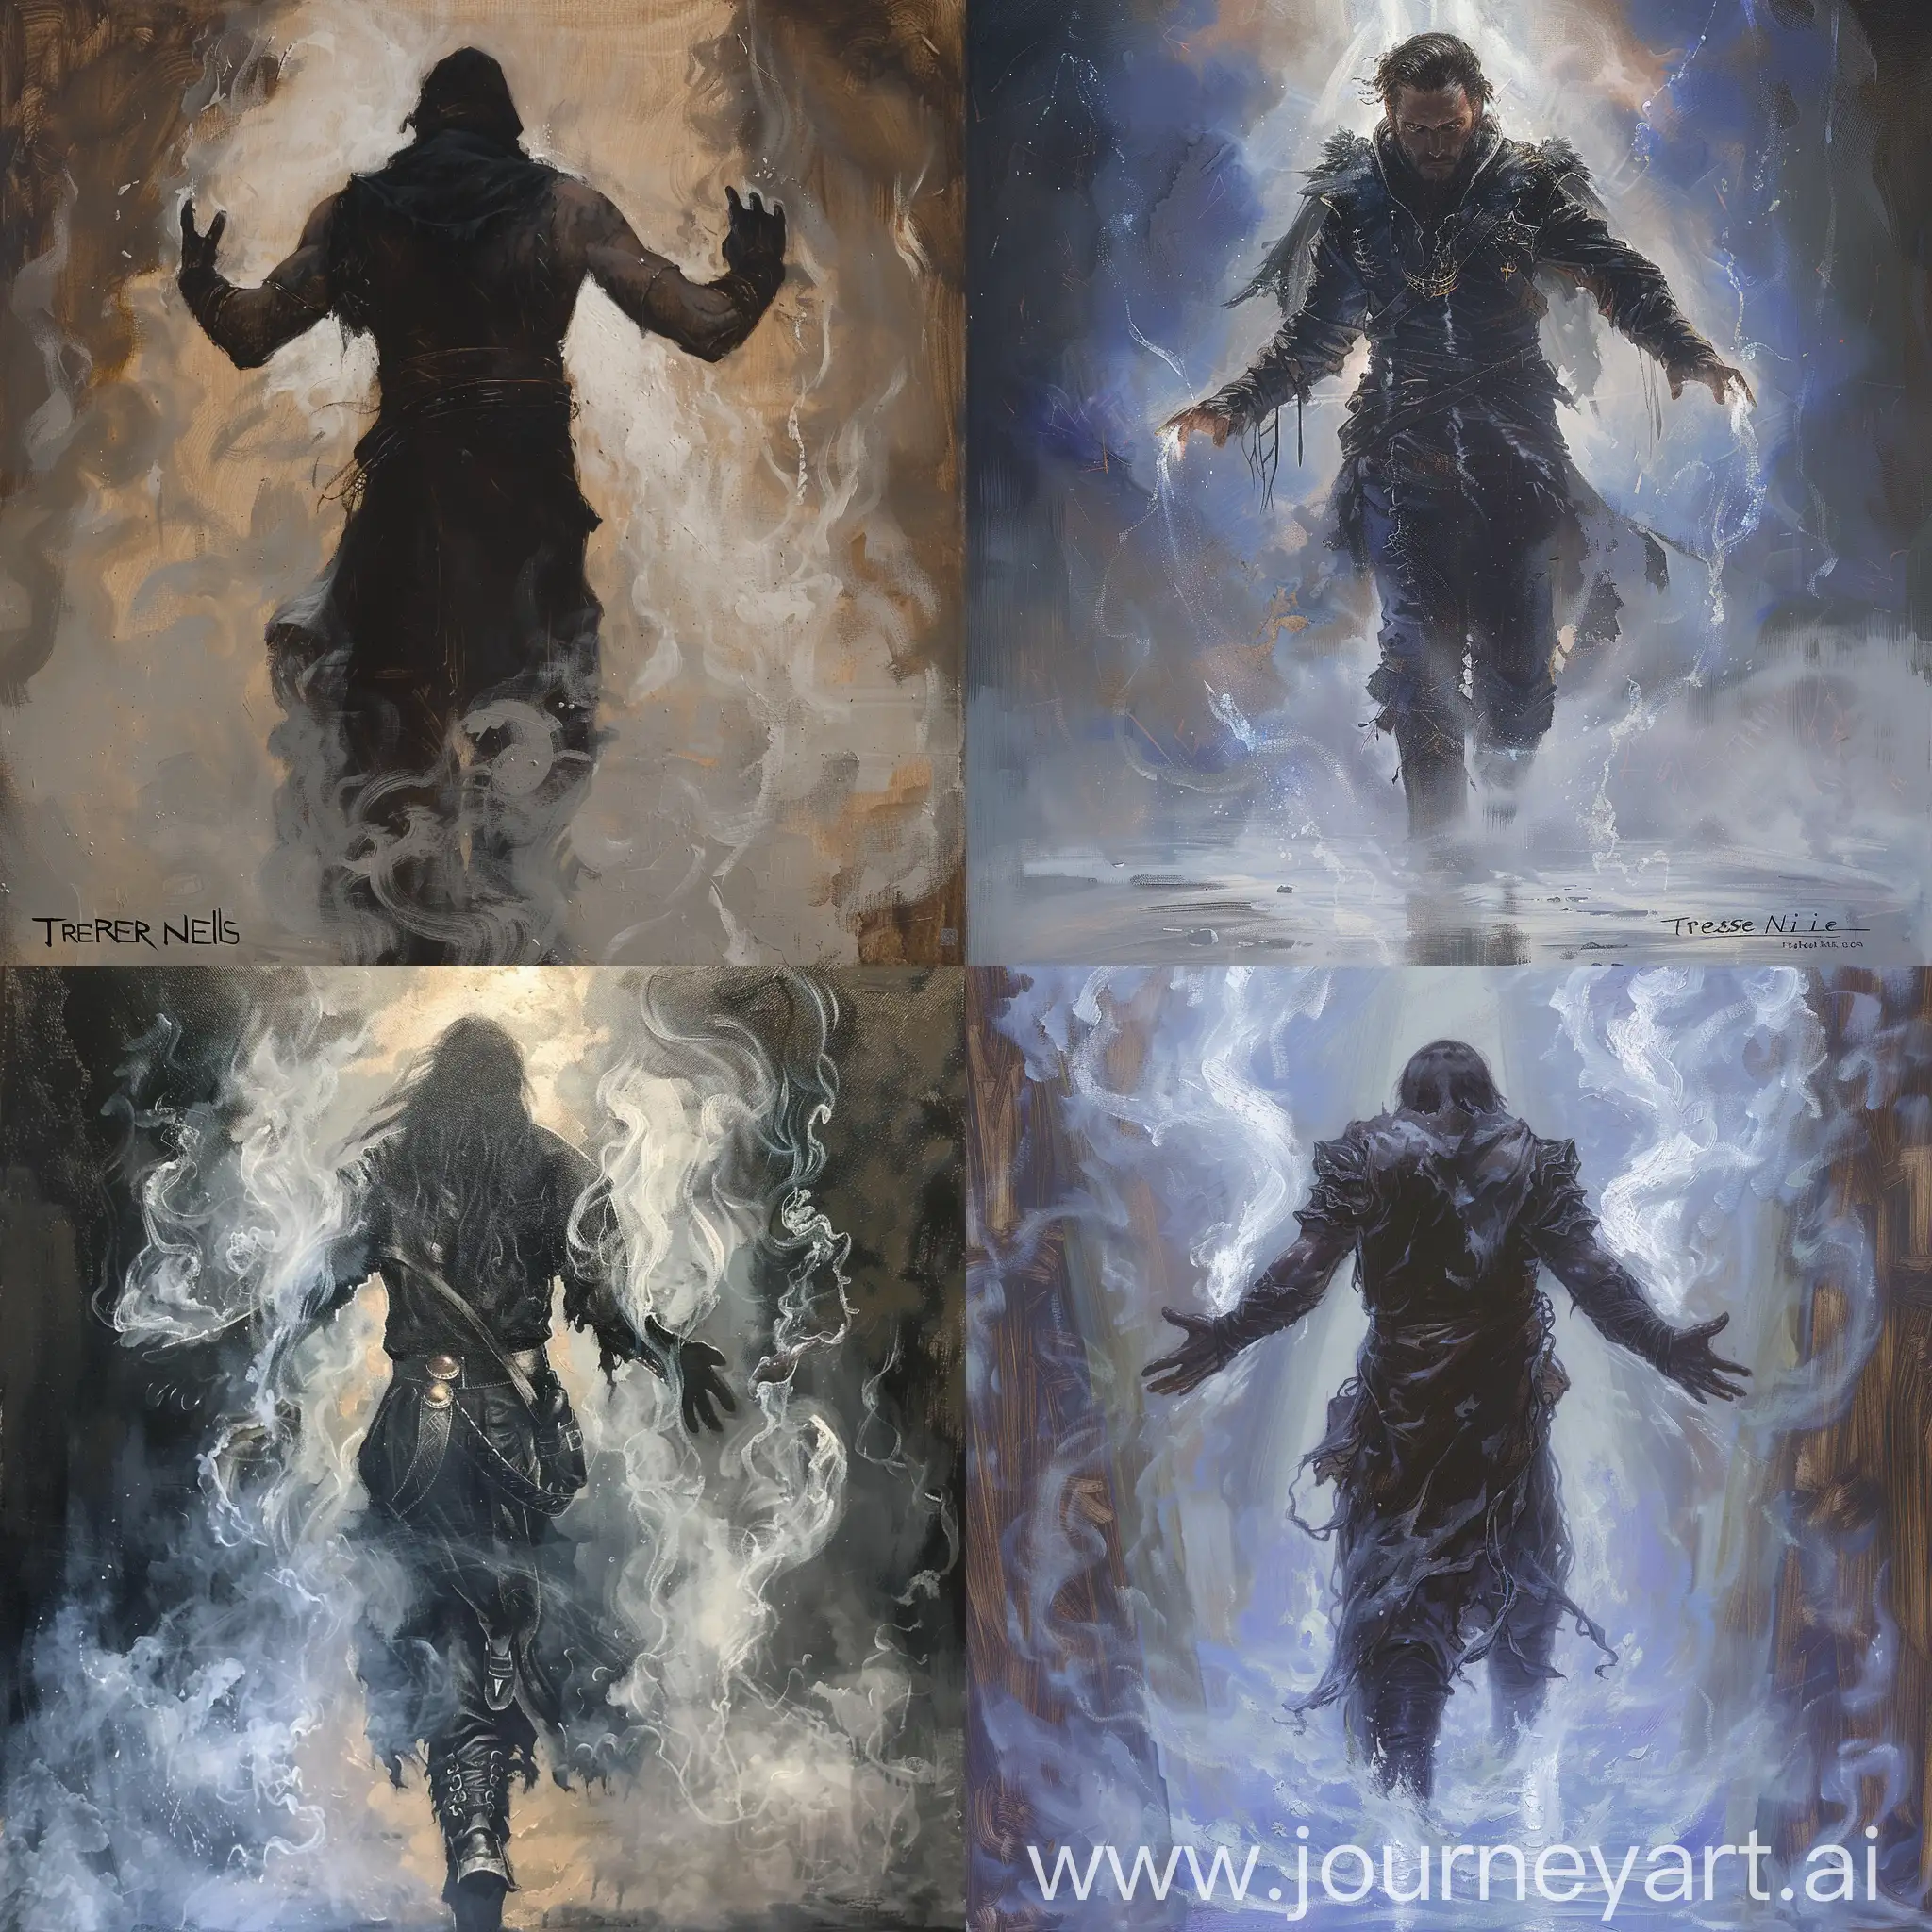 Powerful-Battle-Mage-Walking-Amidst-Steam-in-Terese-Nielsen-Style